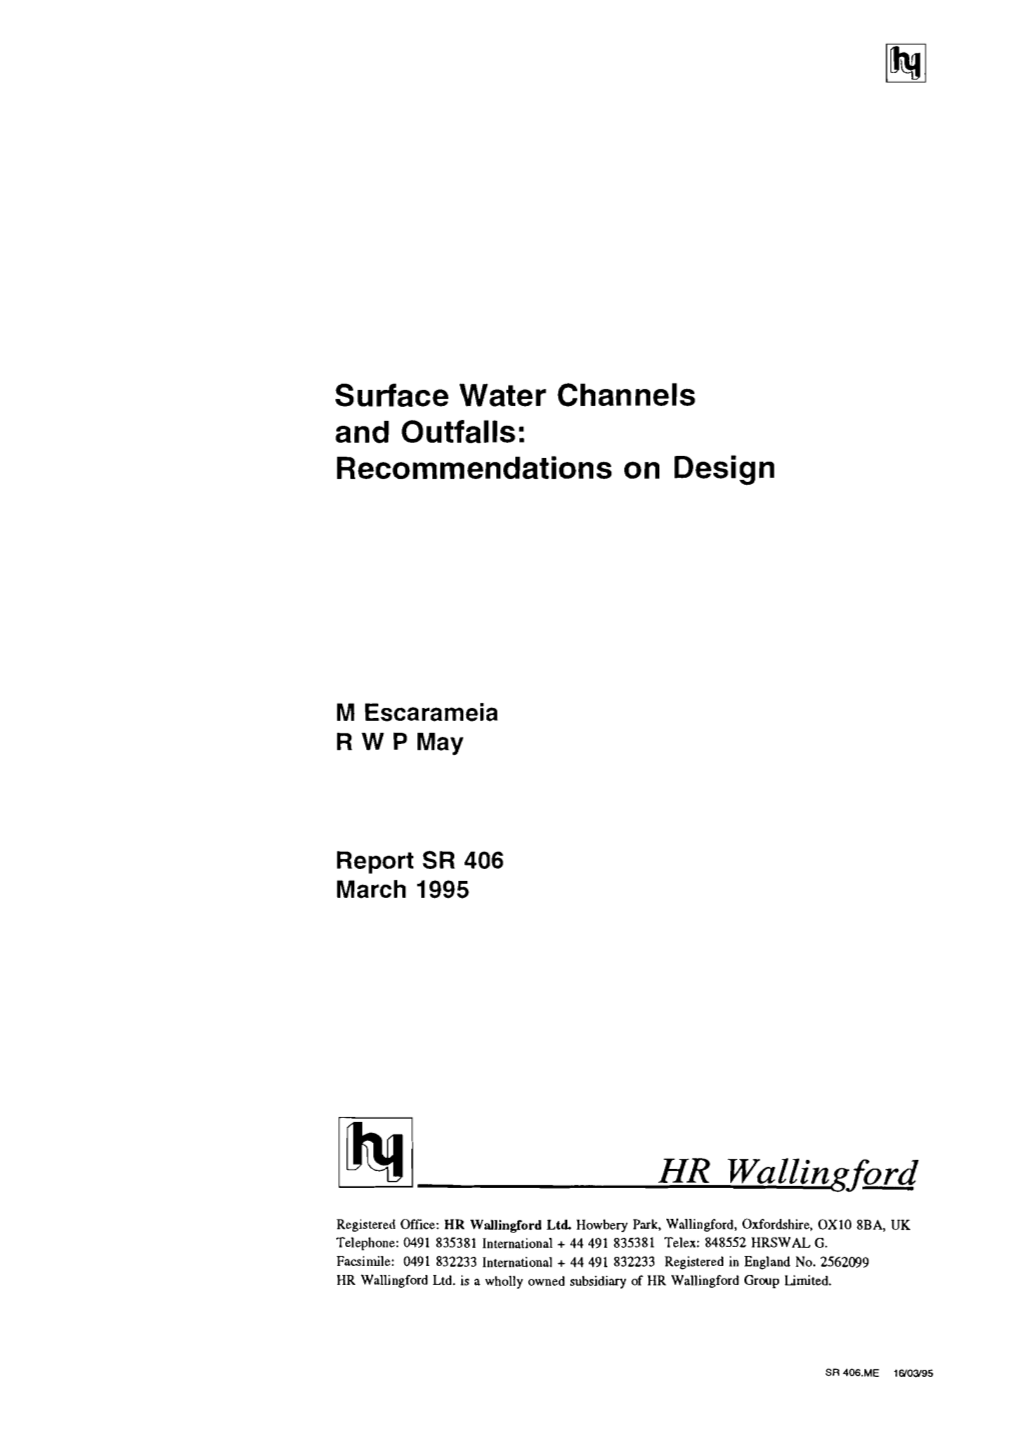 Surface Water Channels and Outfalls: Recommendations on Design